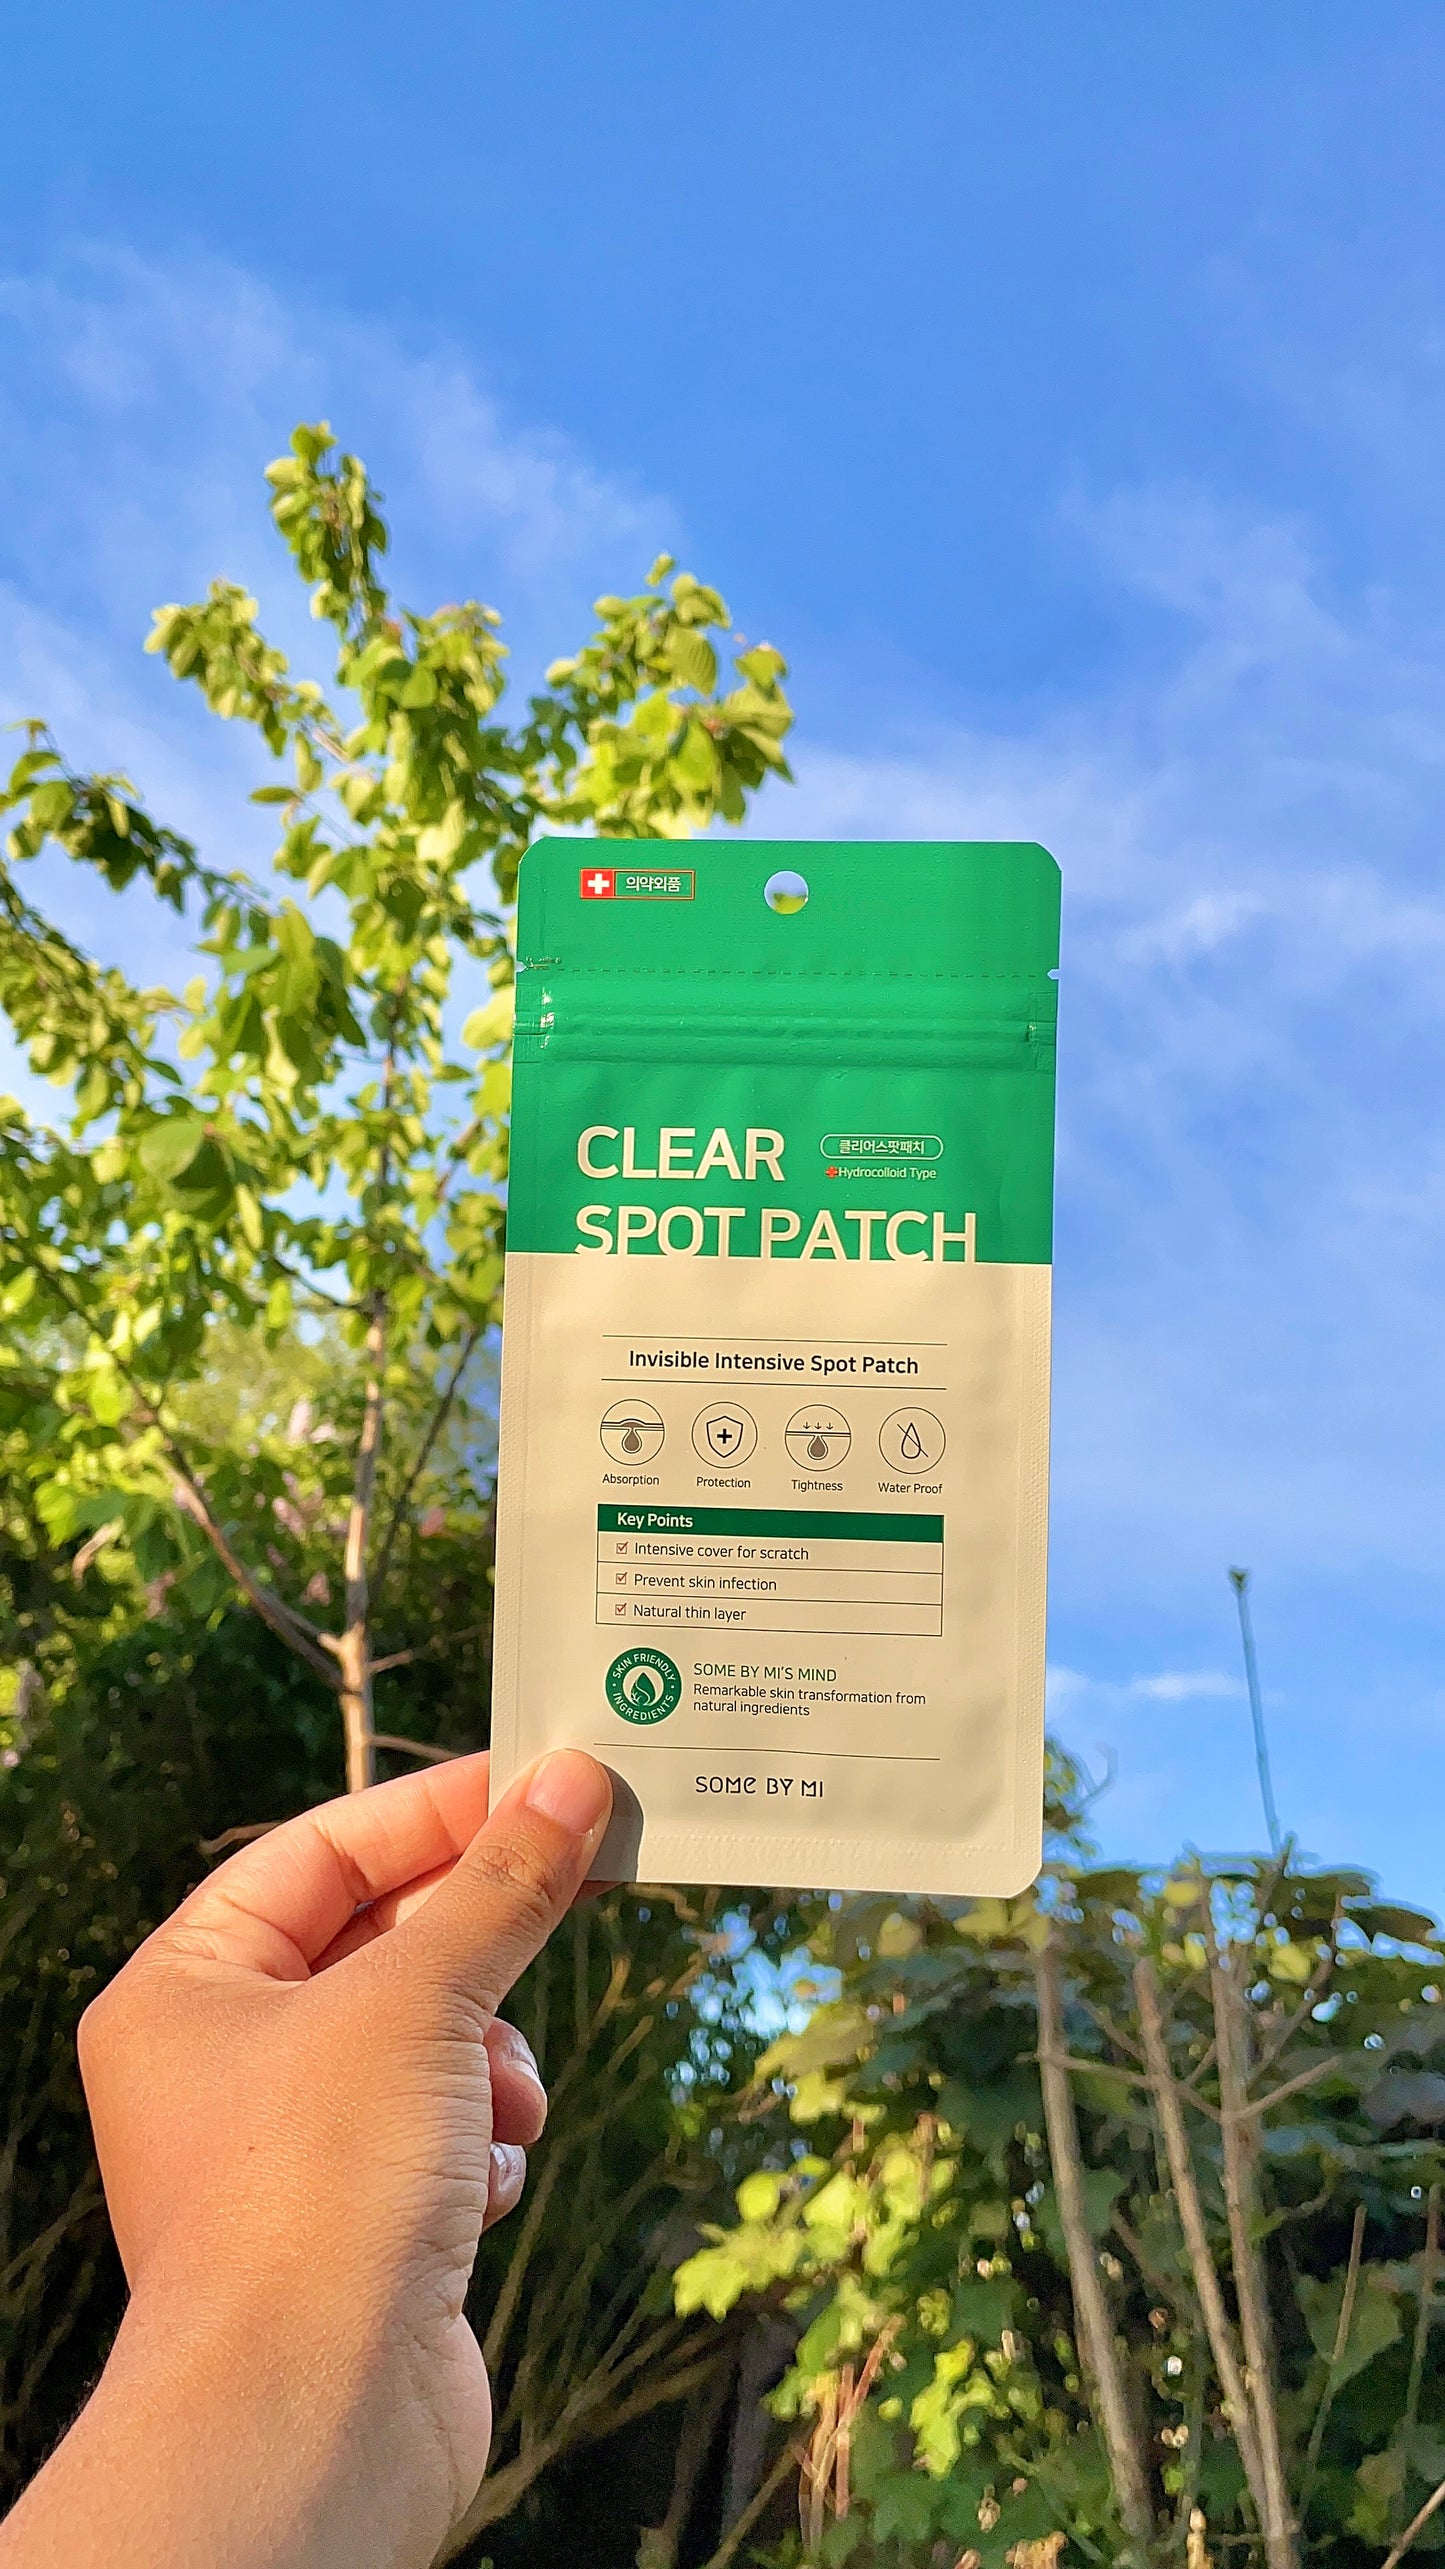 SOME BY MI Clear Spot Patch Acne